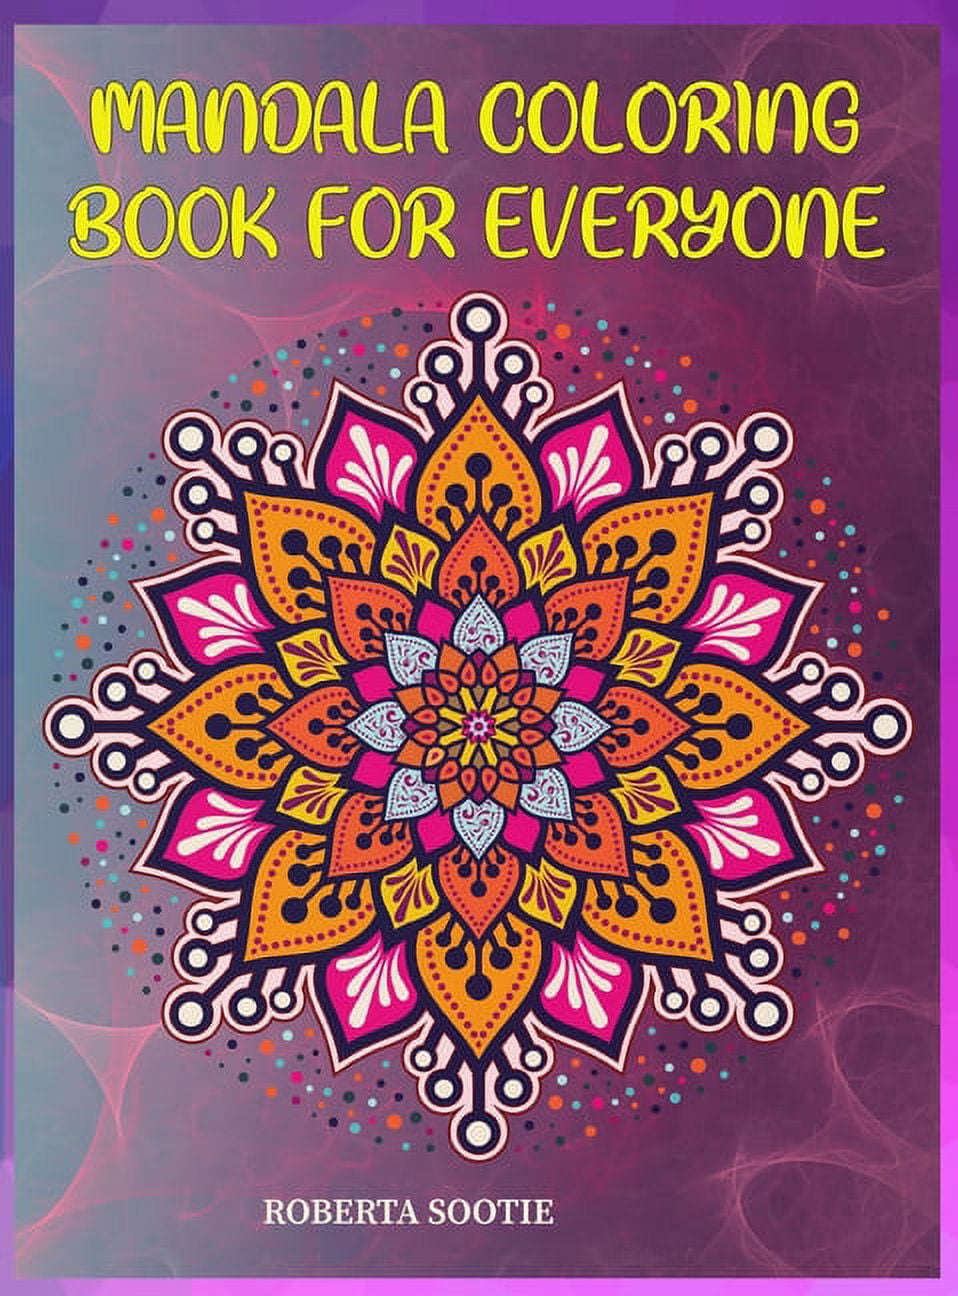 MANDALA Coloring Book For Adults: Adult Coloring Book for selfcare,  mindfulness activity I Mandala Coloring Book designed to soothe the soul  (Paperback)